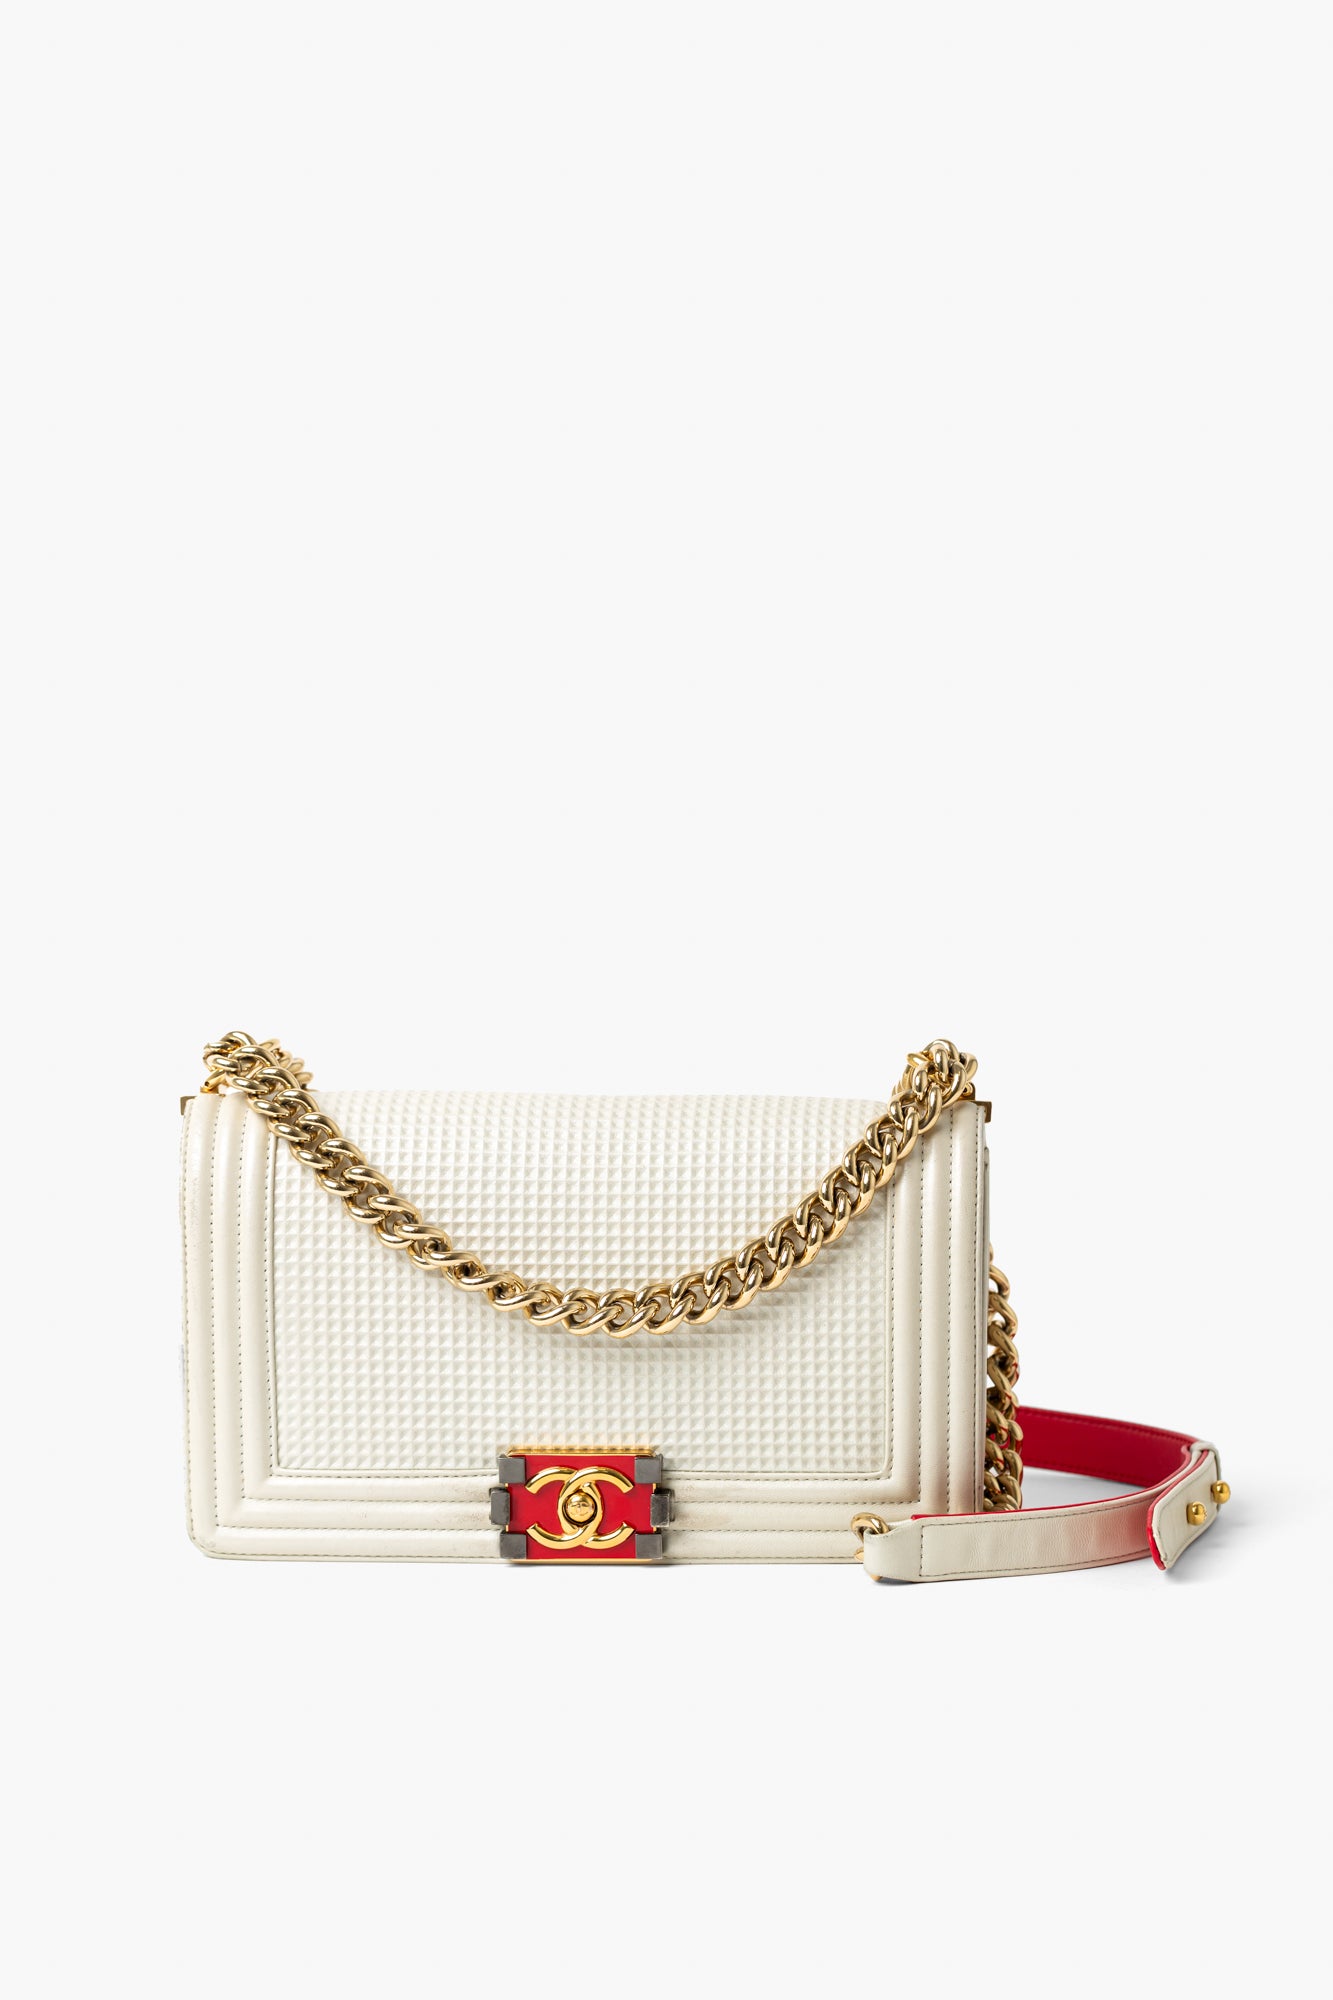 red and white chanel bag new